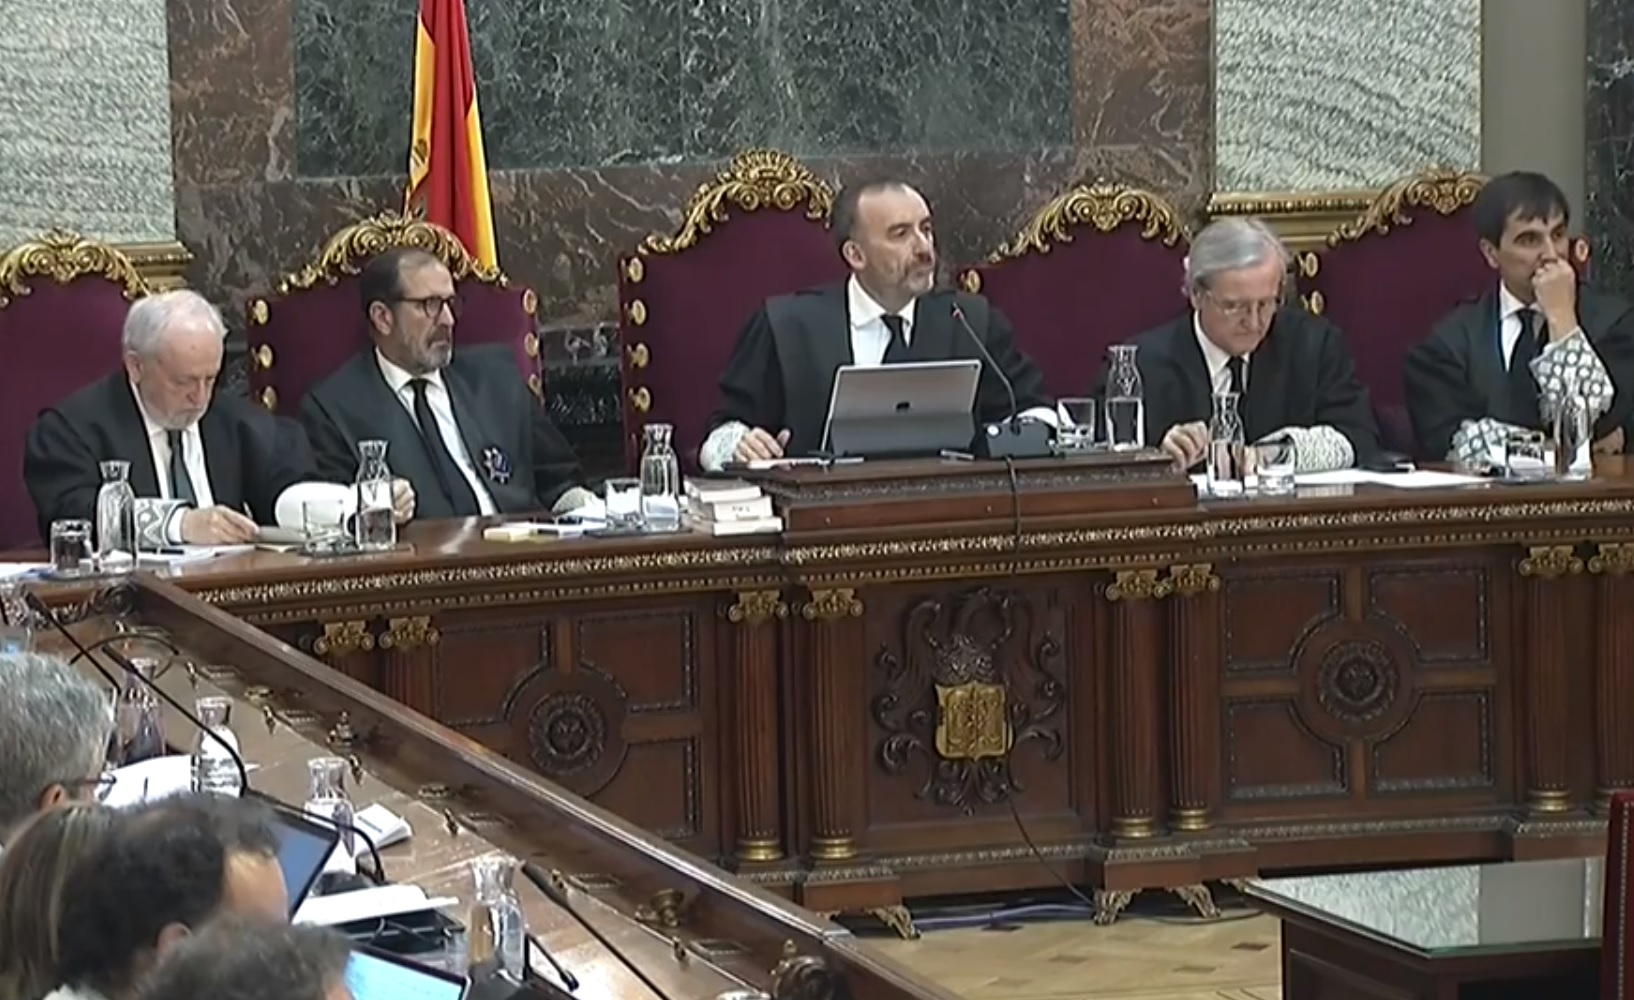 Supreme Court courtroom where the Catalan independence trial is taking place (by EFE)